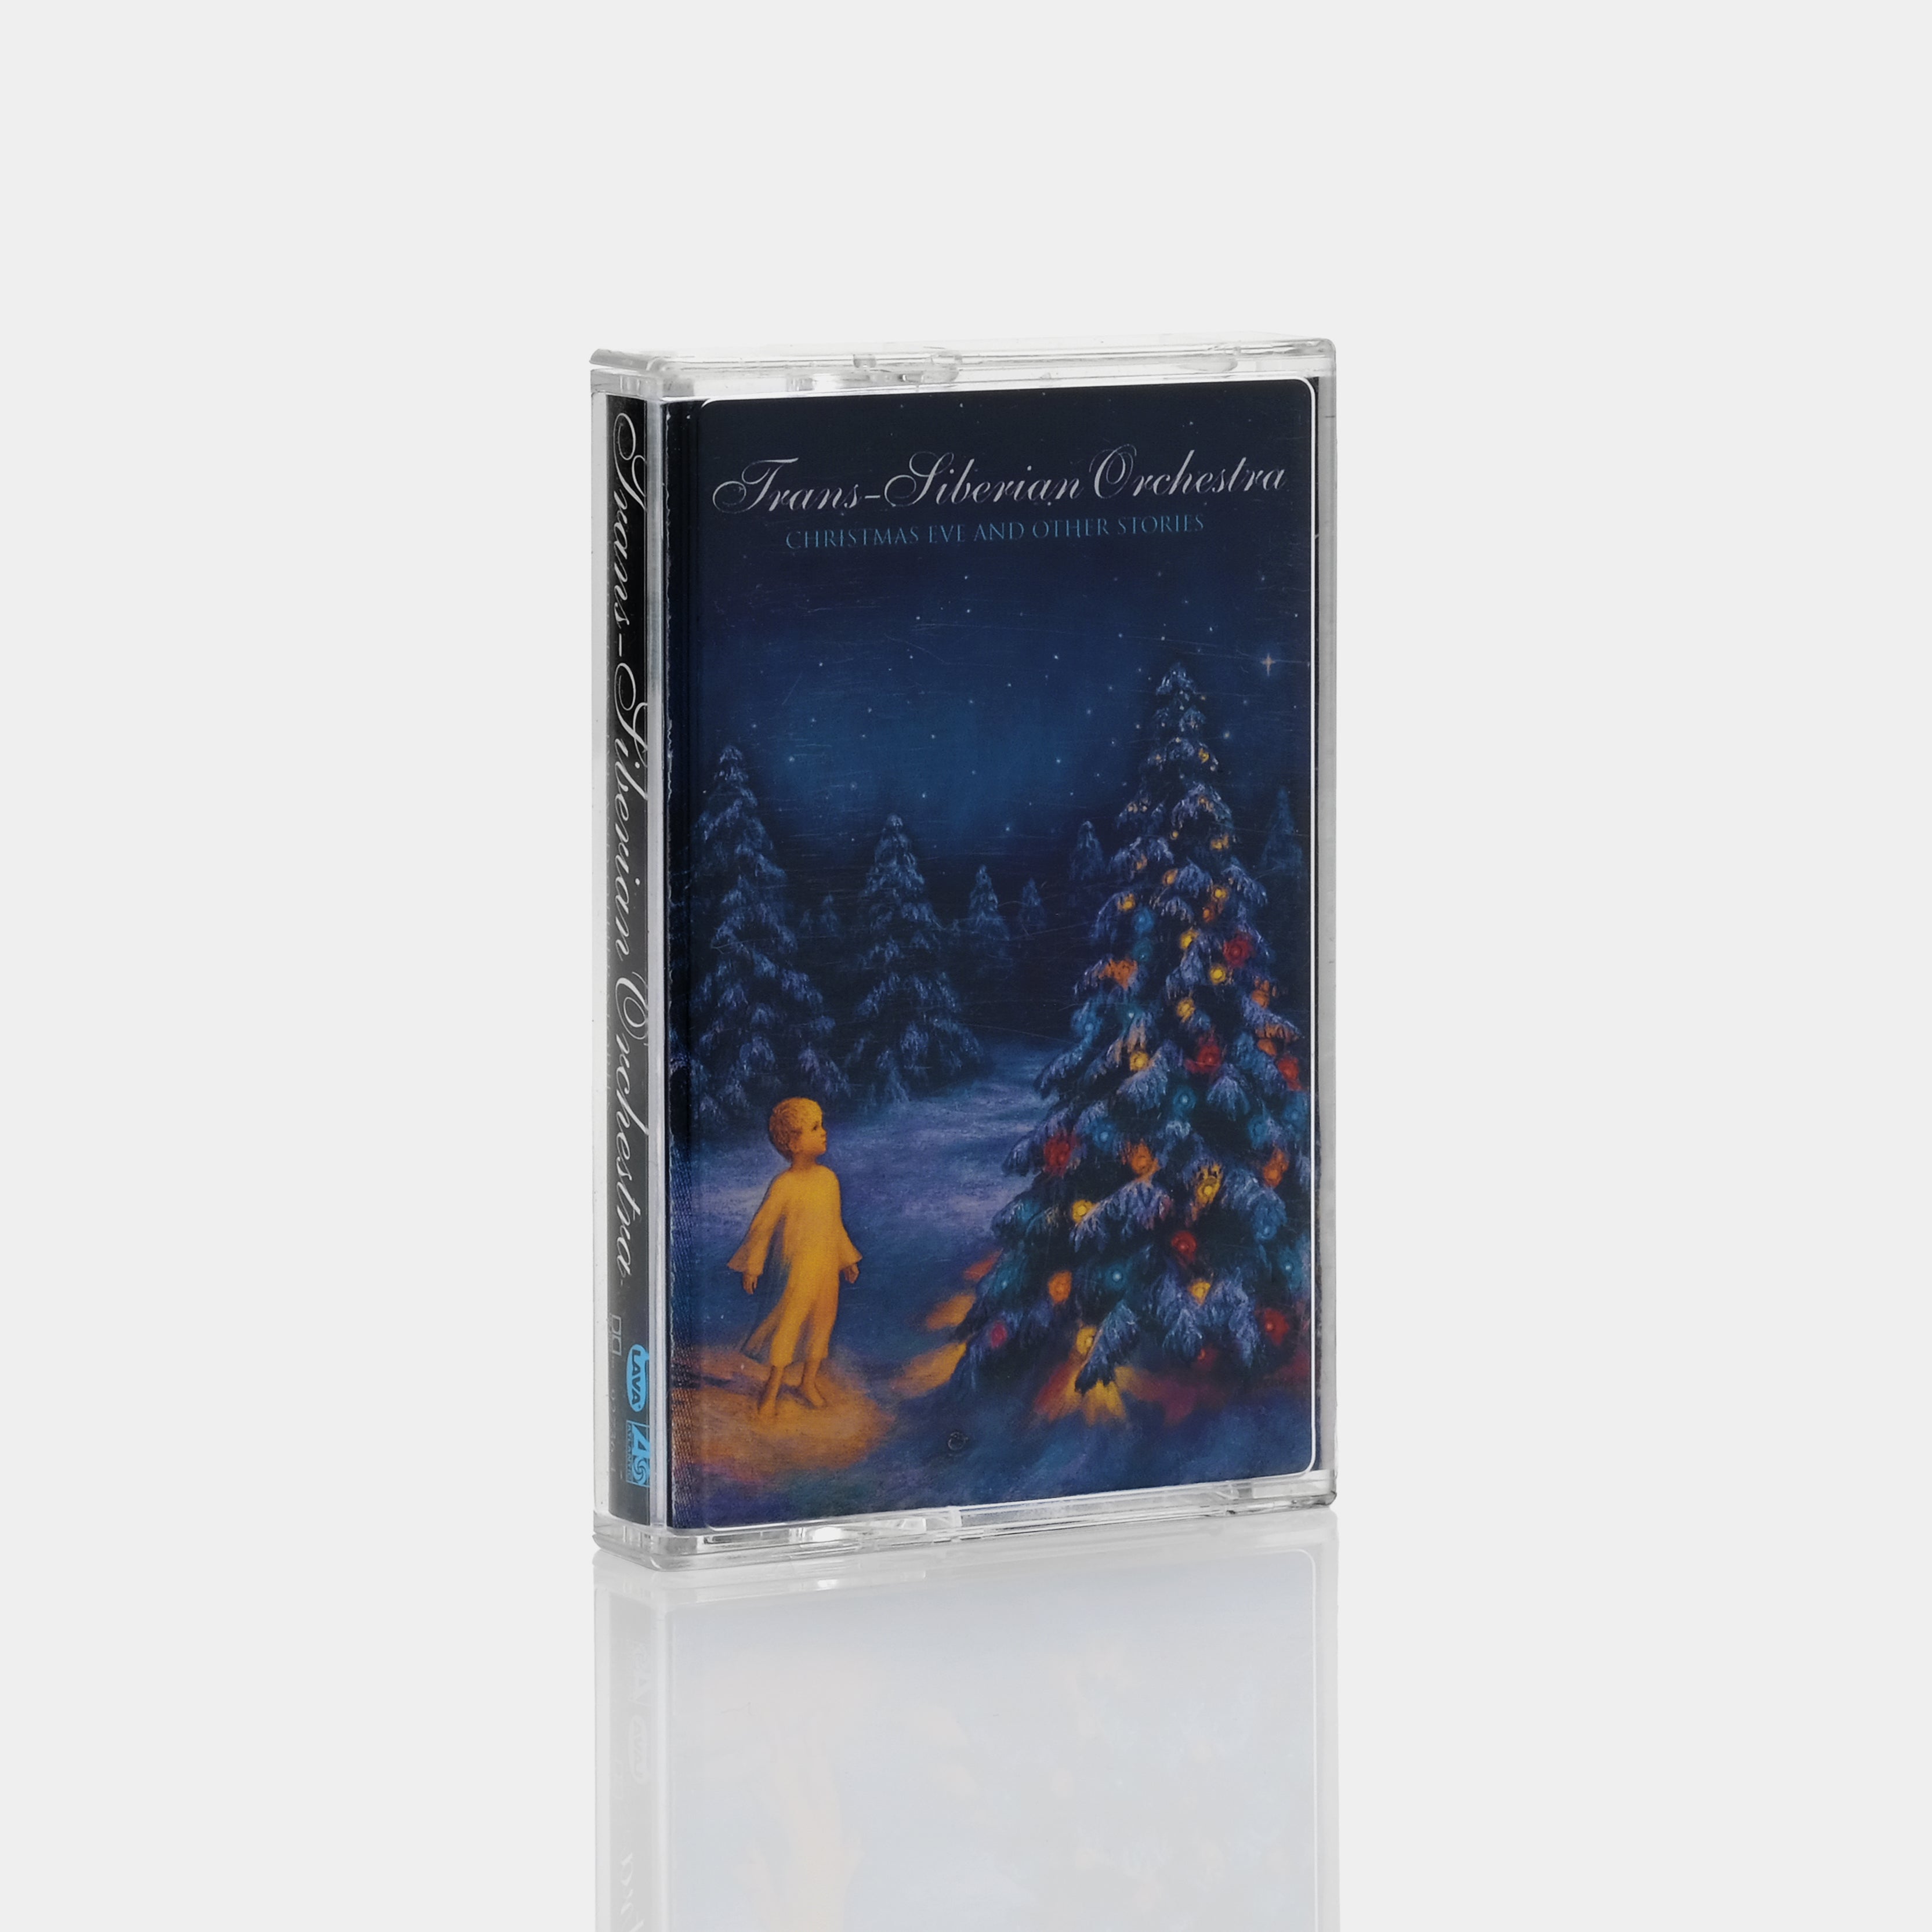 Trans-Siberian Orchestra - Christmas Eve And Other Stories Cassette Tape